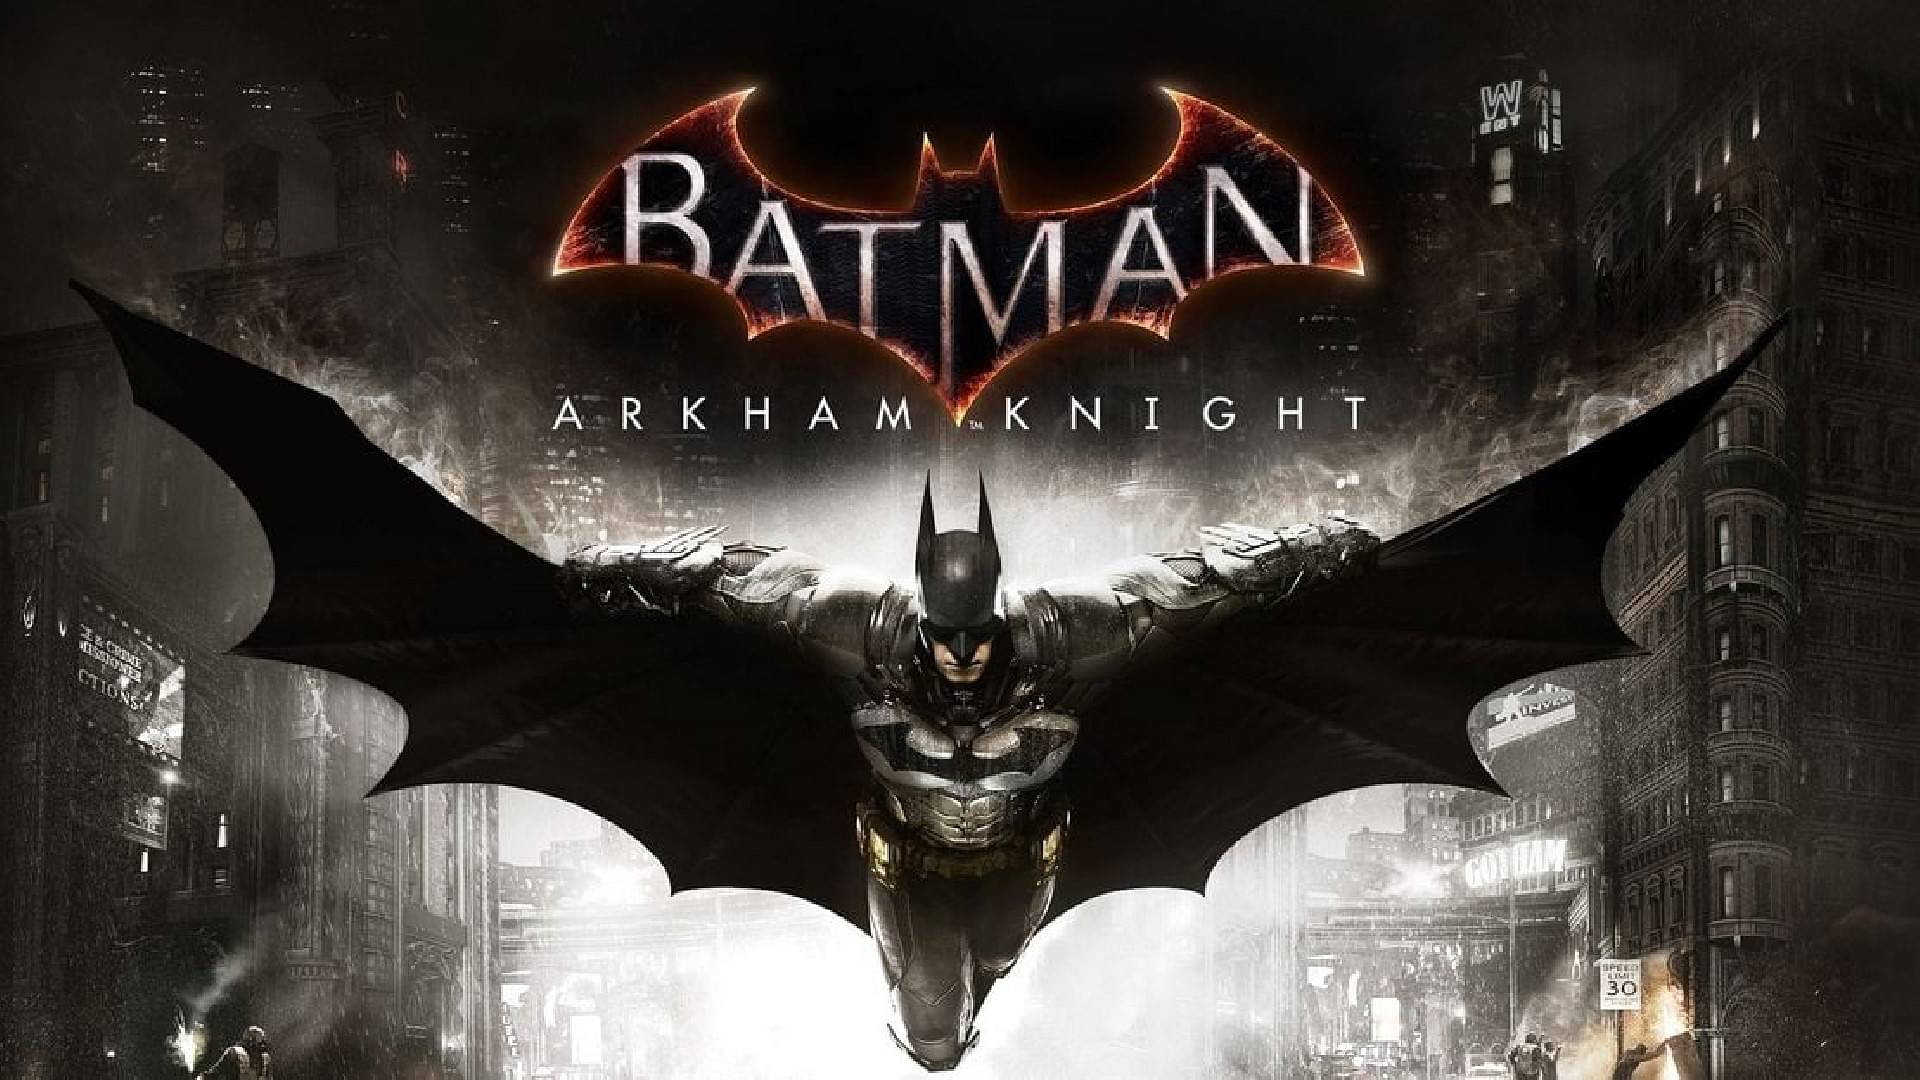 An image of the Batman Arkham Knight Poster